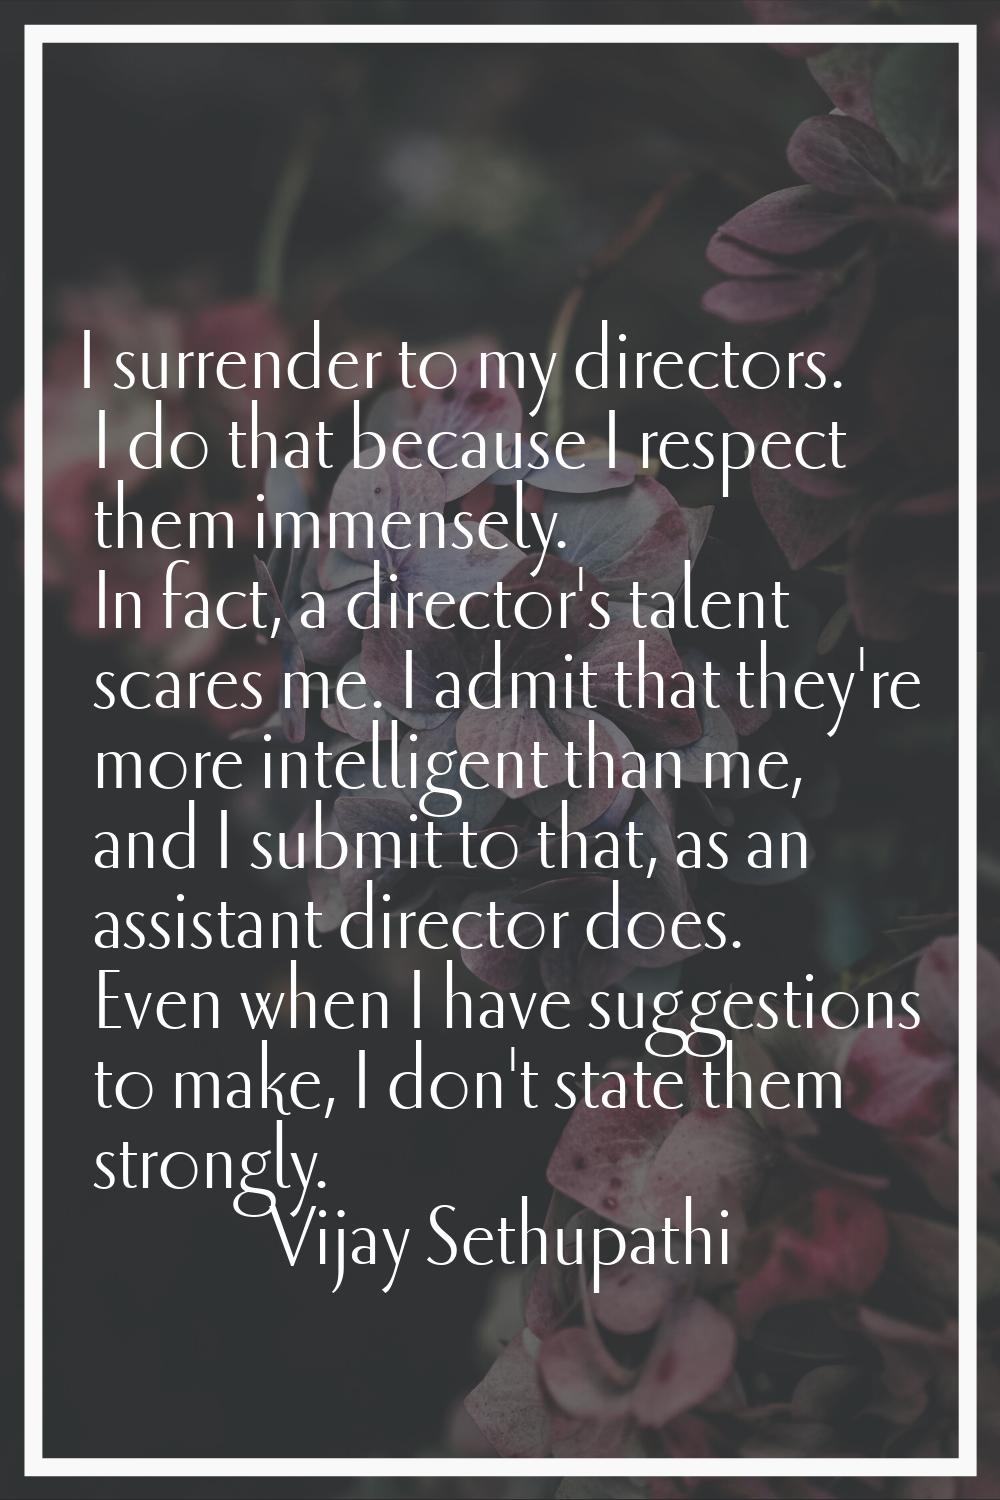 I surrender to my directors. I do that because I respect them immensely. In fact, a director's tale